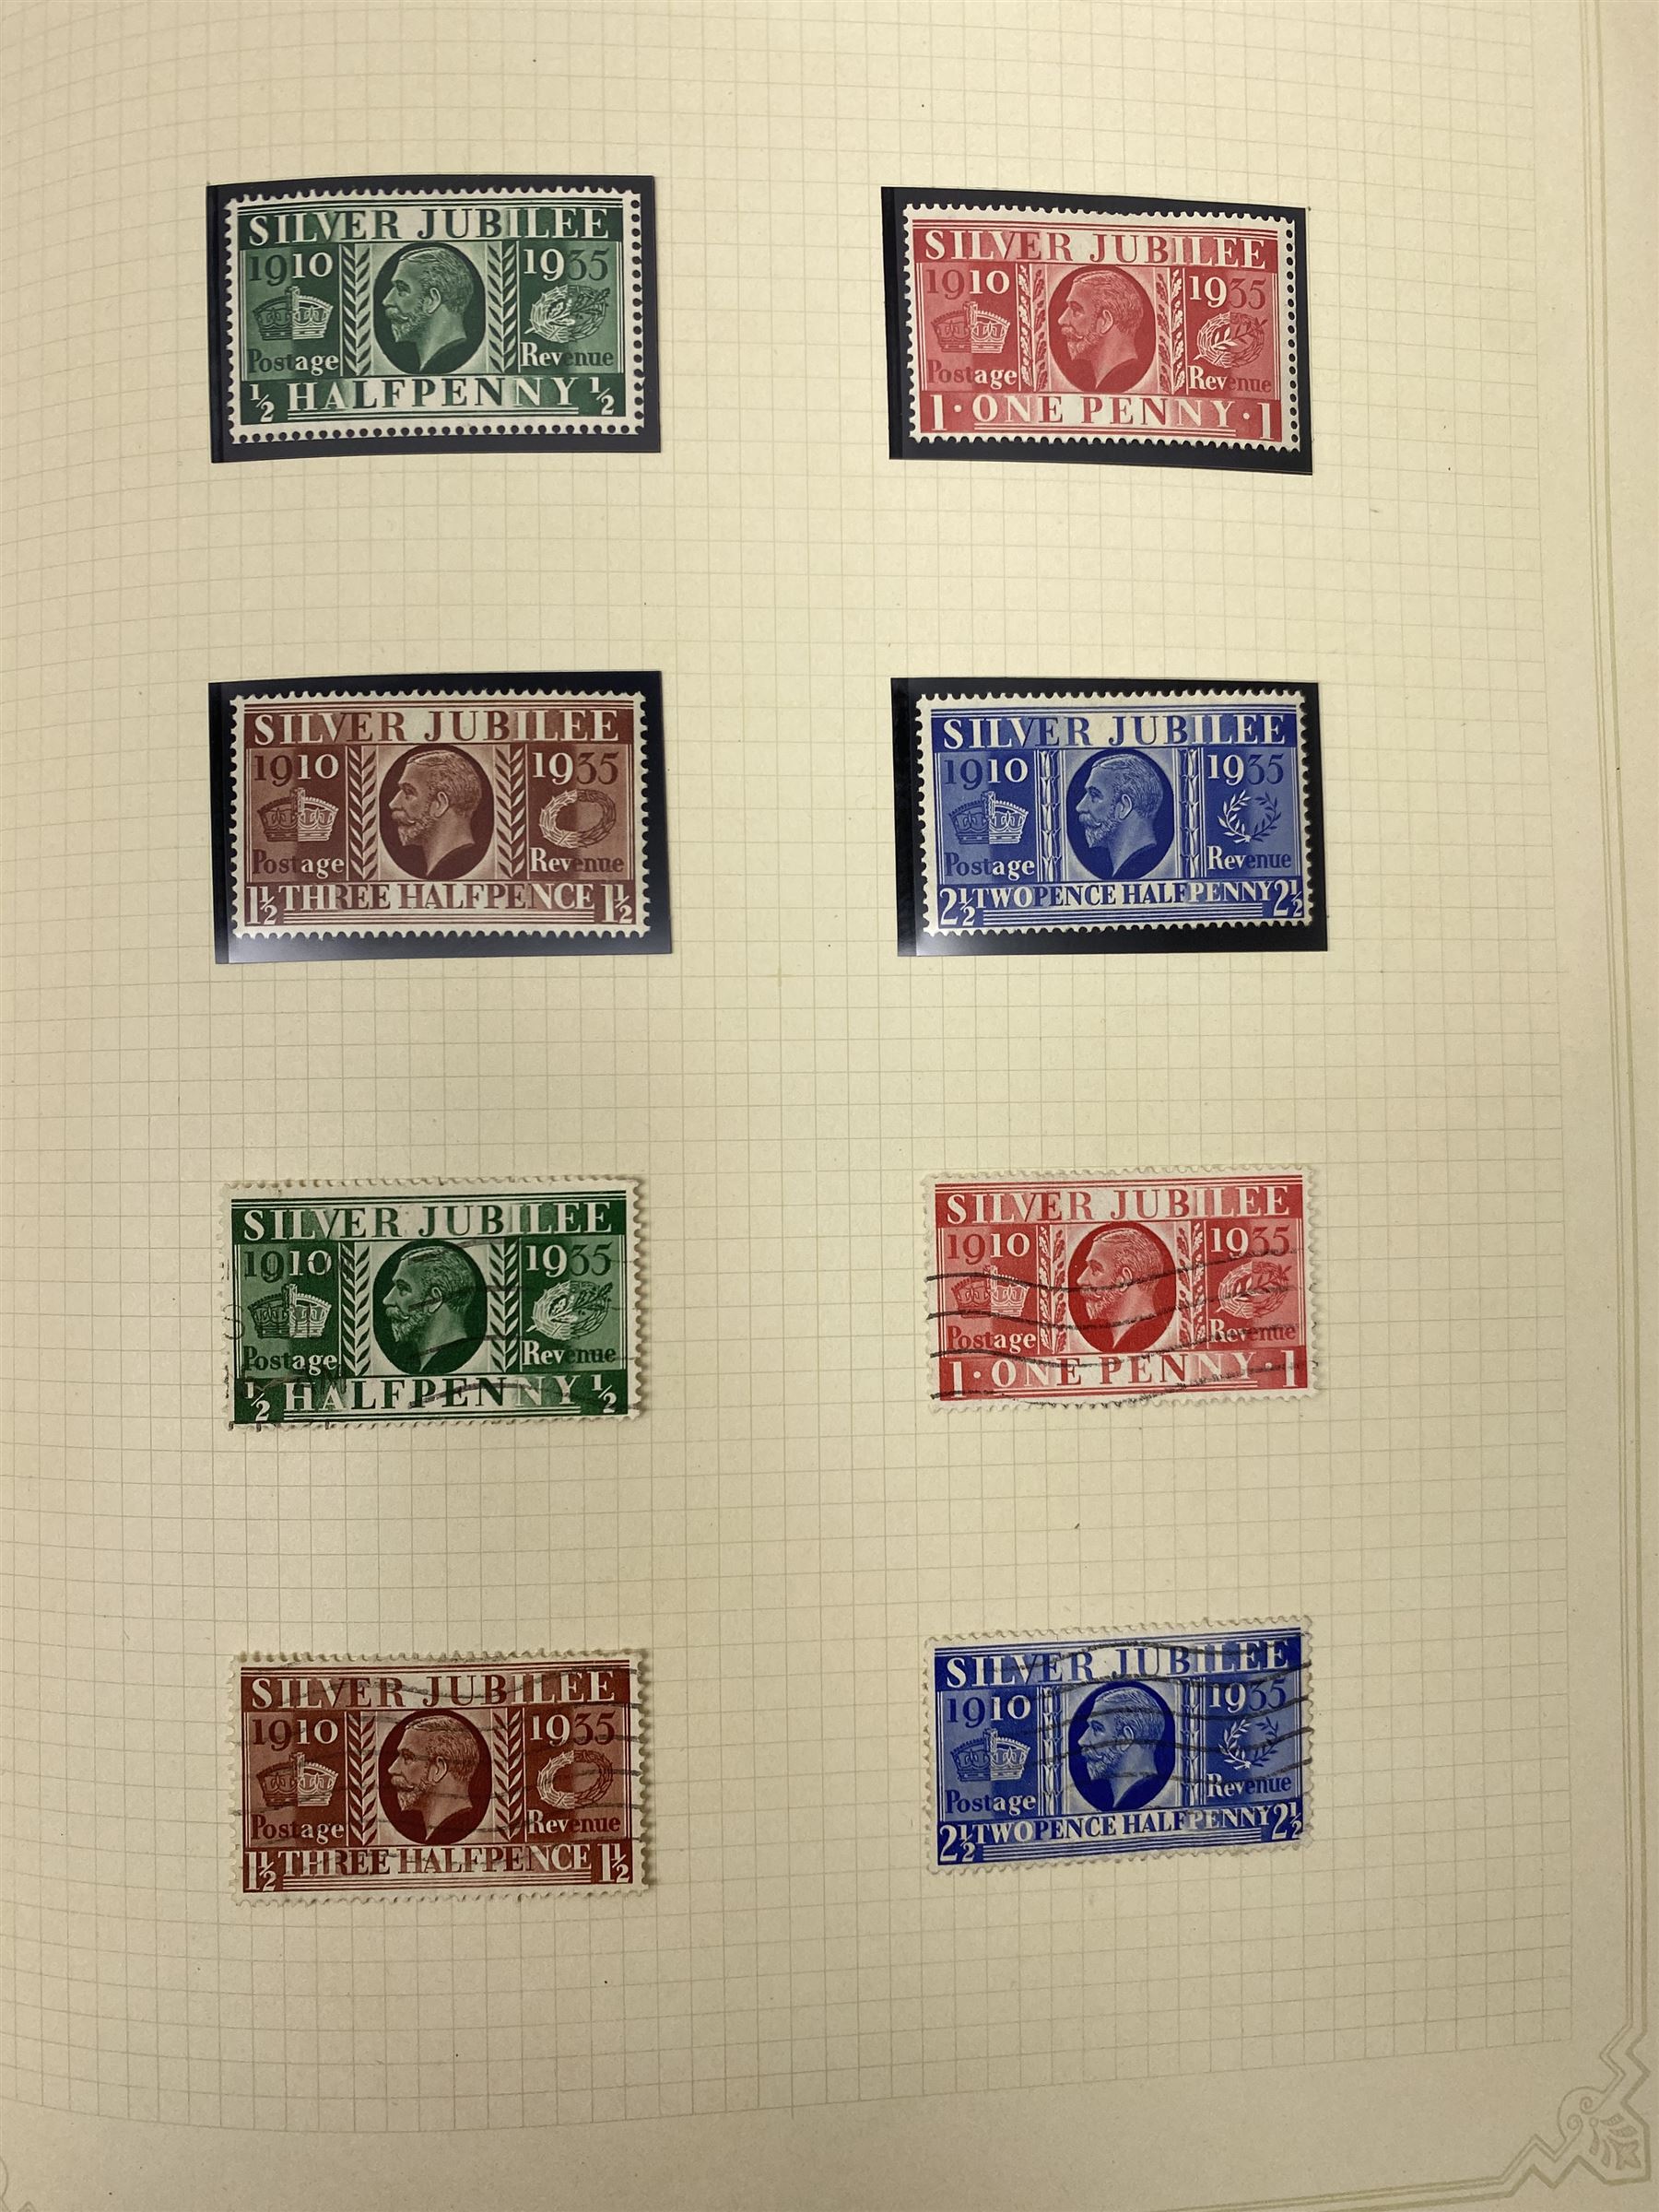 King George V 1935 Silver Jubilee stamps - Image 3 of 17